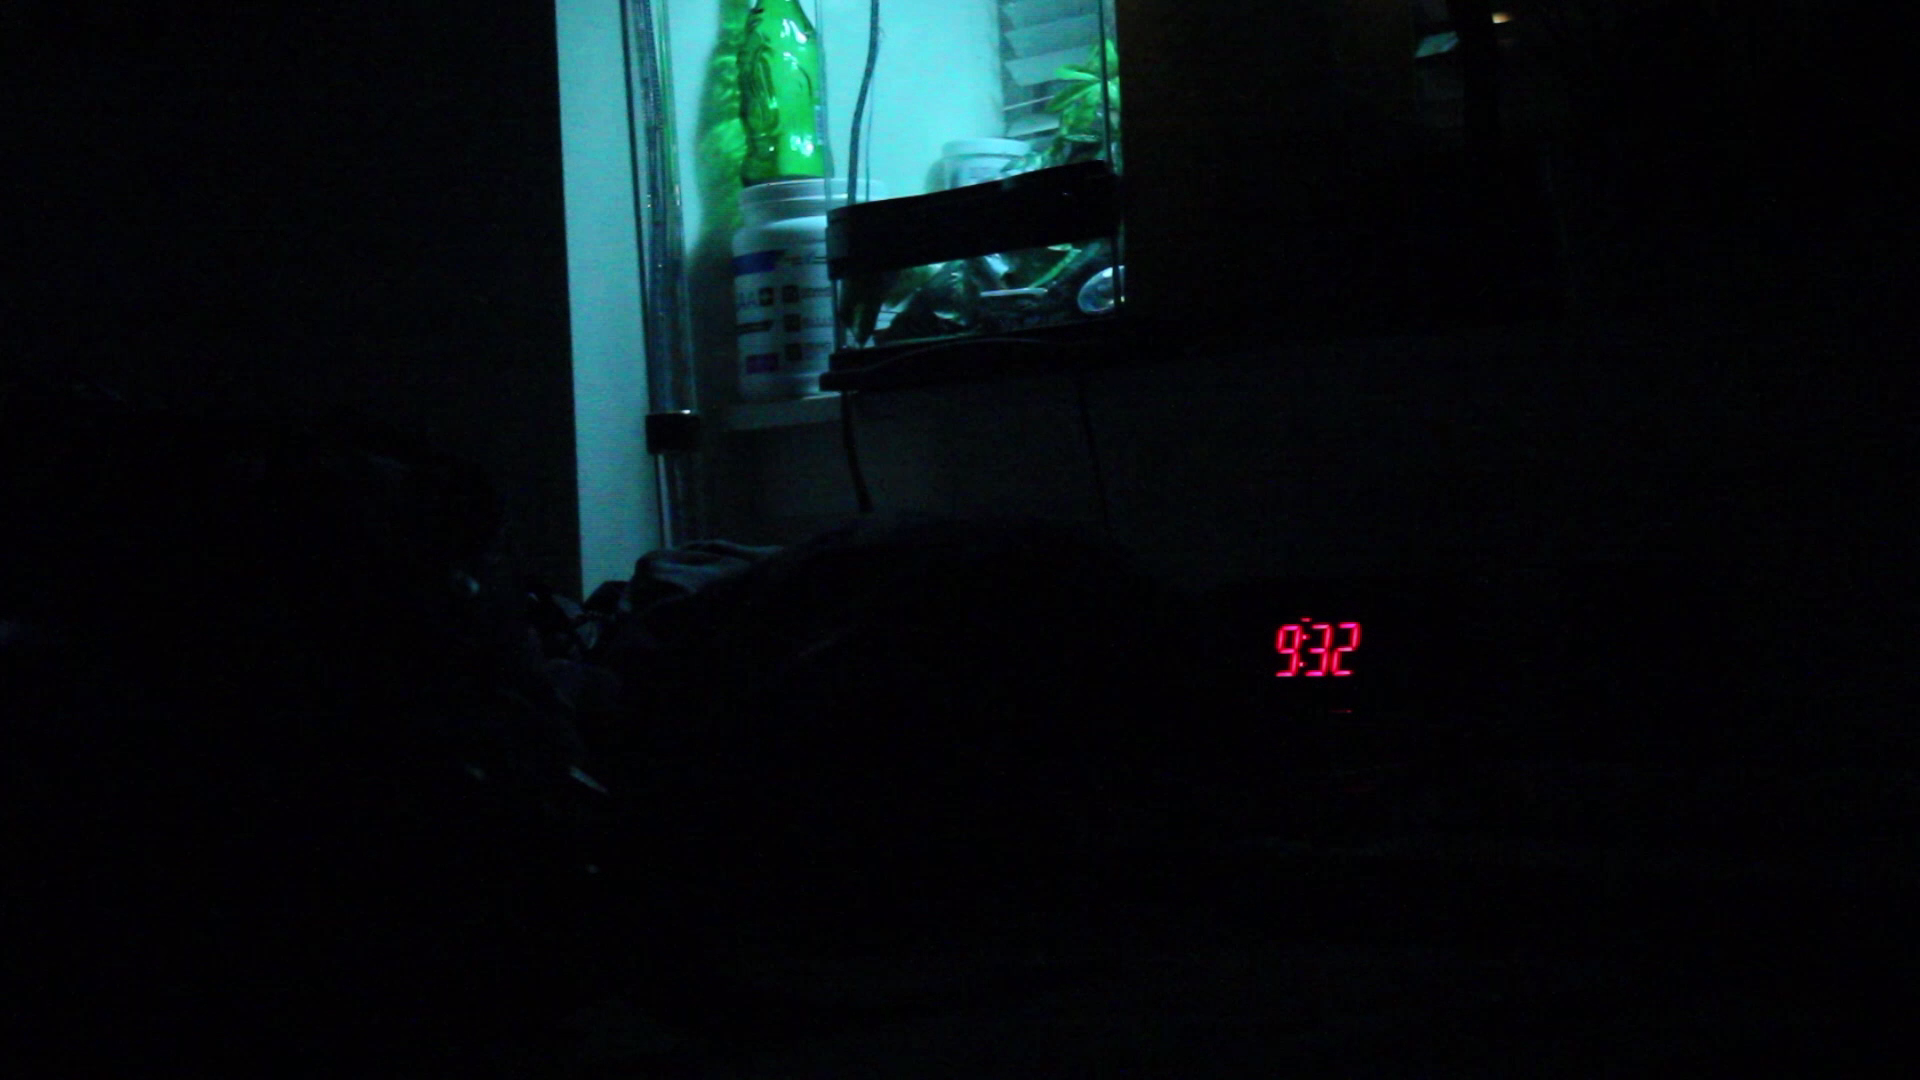 dark room with clock showing time